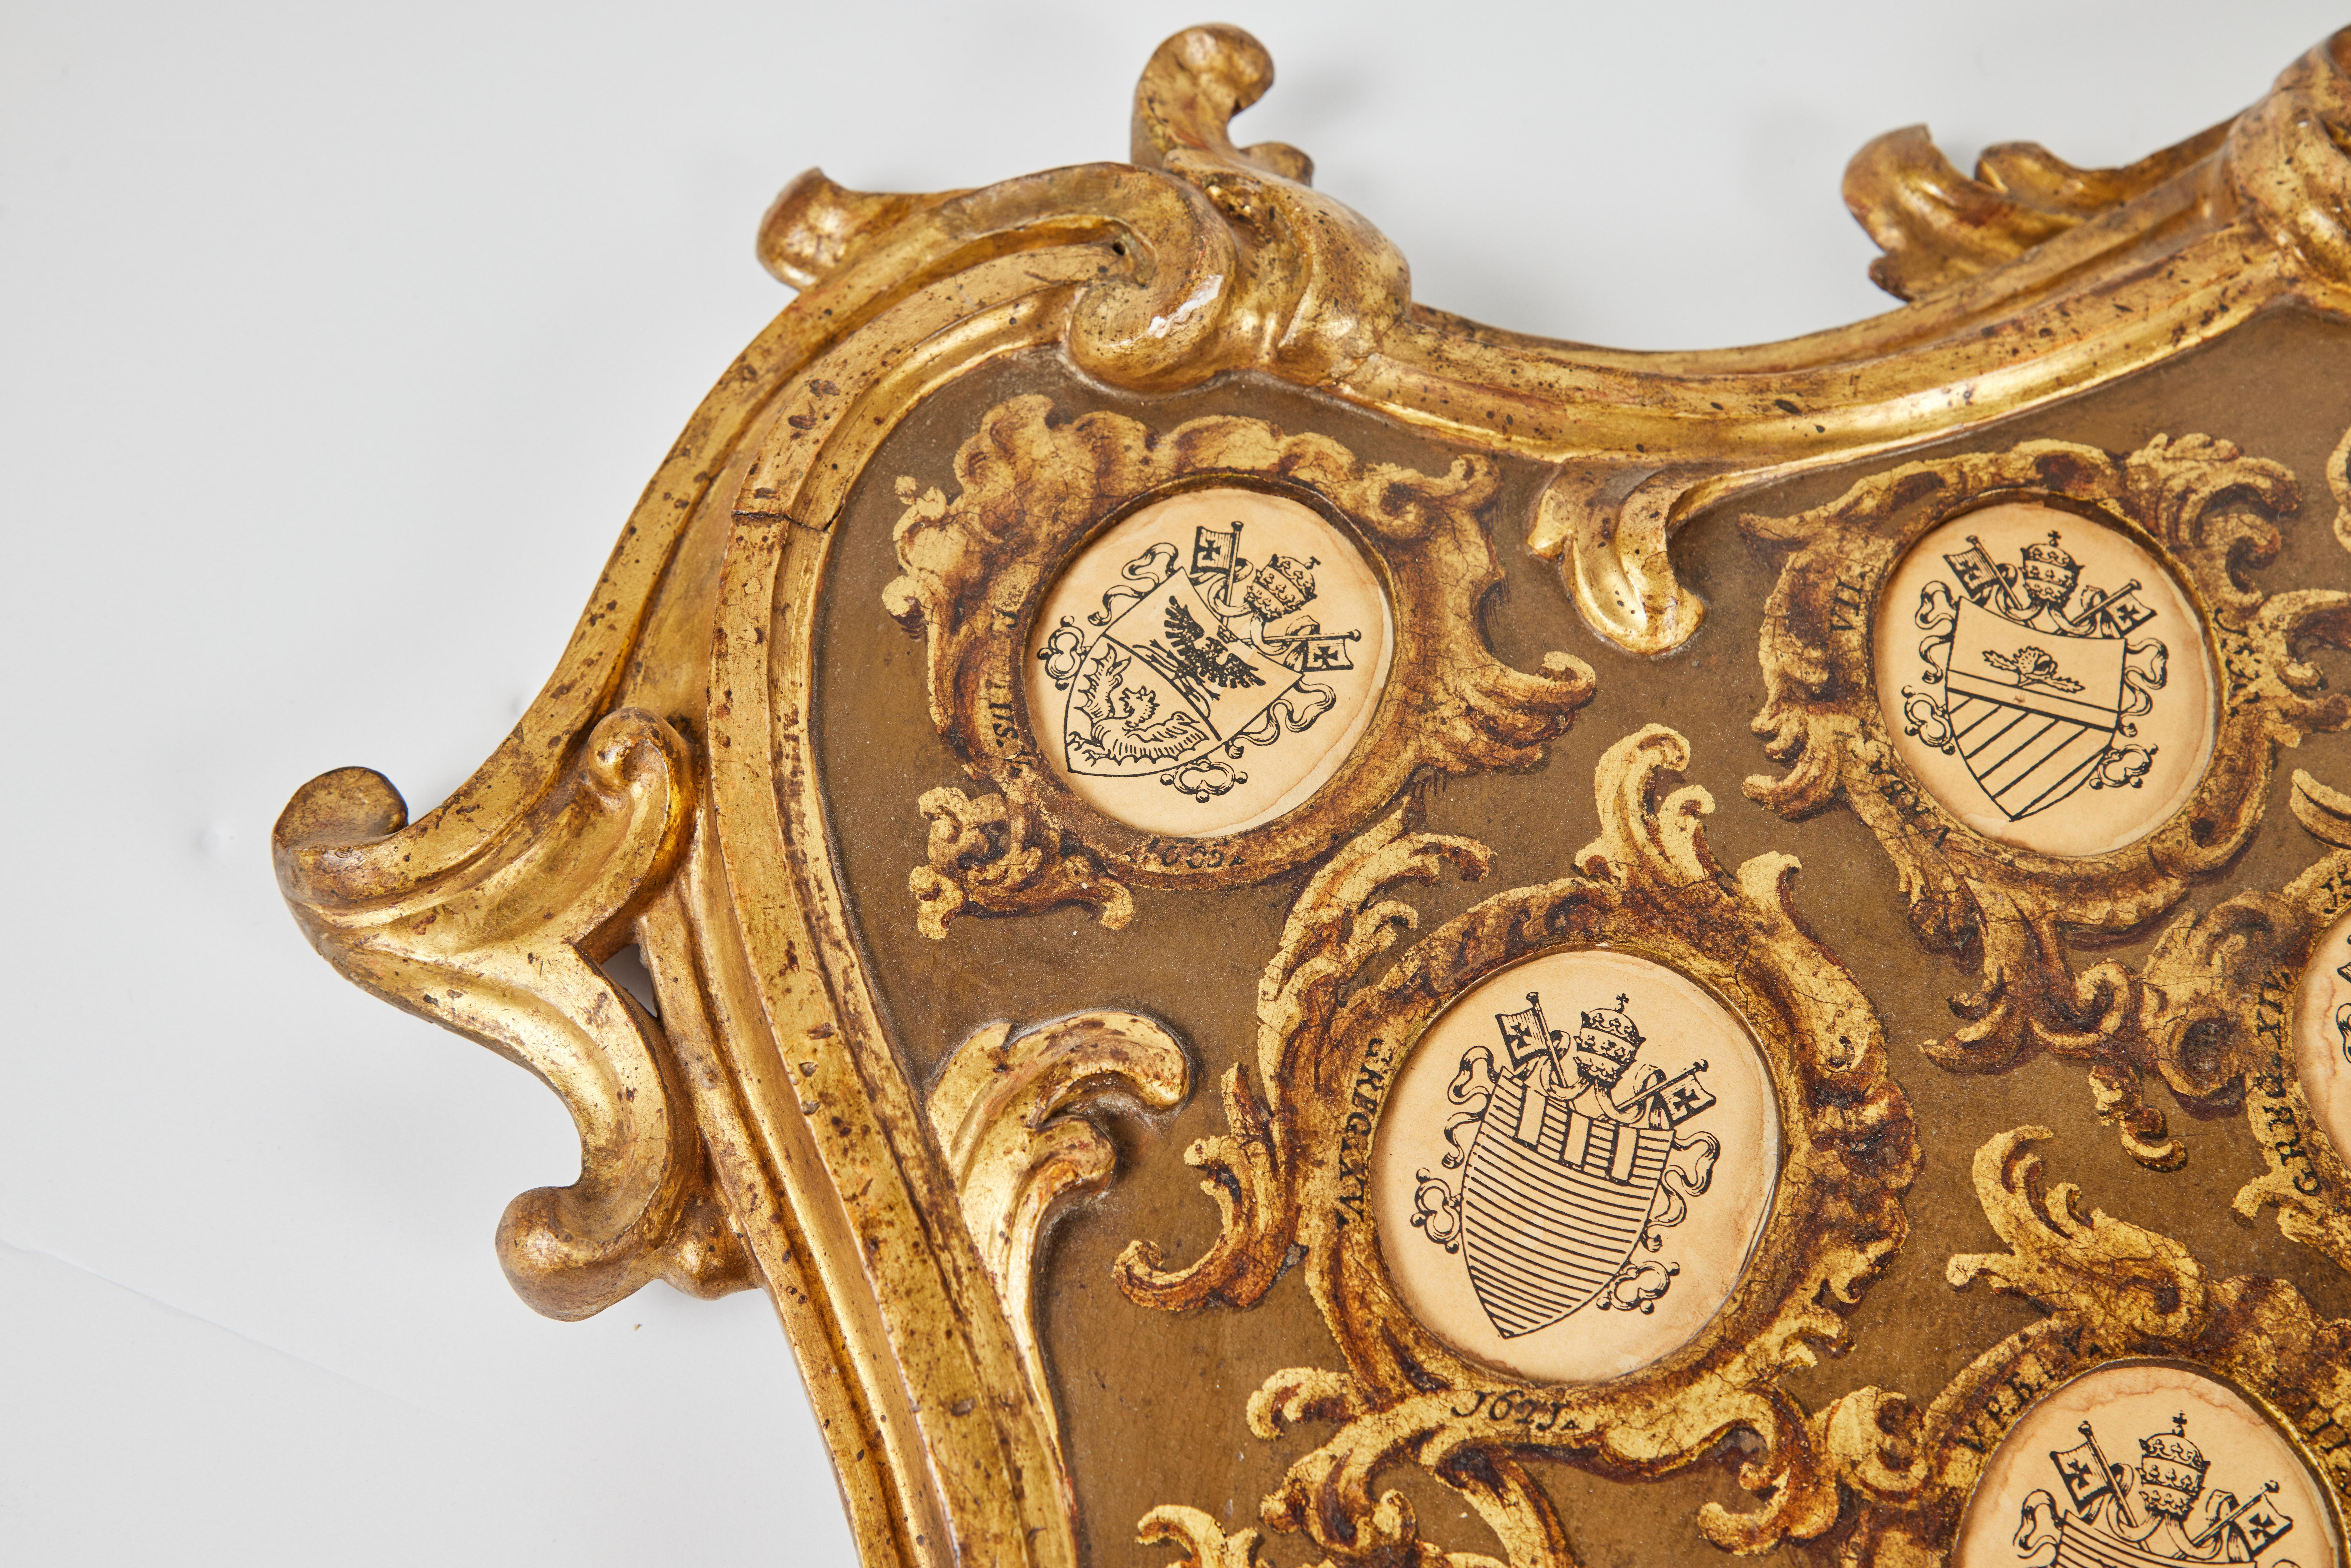 A remarkable, one-of-a-kind, hand-carved, gessoed, 22k gold gilded, hand-painted, foliate embellished serpentine, crest-form, 19th century, convex Italian frame inset with ink-on-vellum images of 24 papal crests. The full set wasn't completed by the